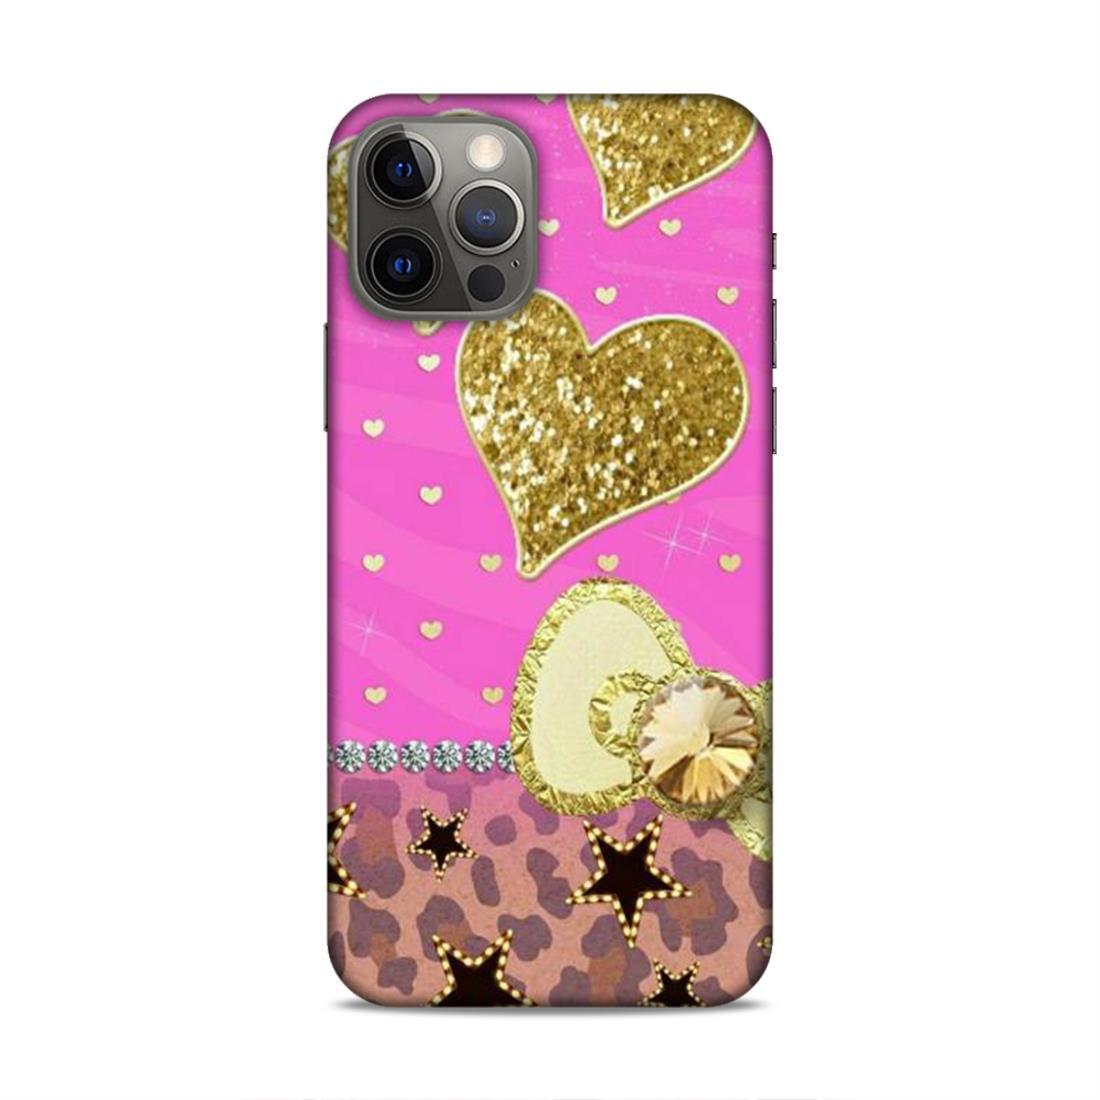 Cute Pink Heart iPhone 12 Pro Phone Case Cover